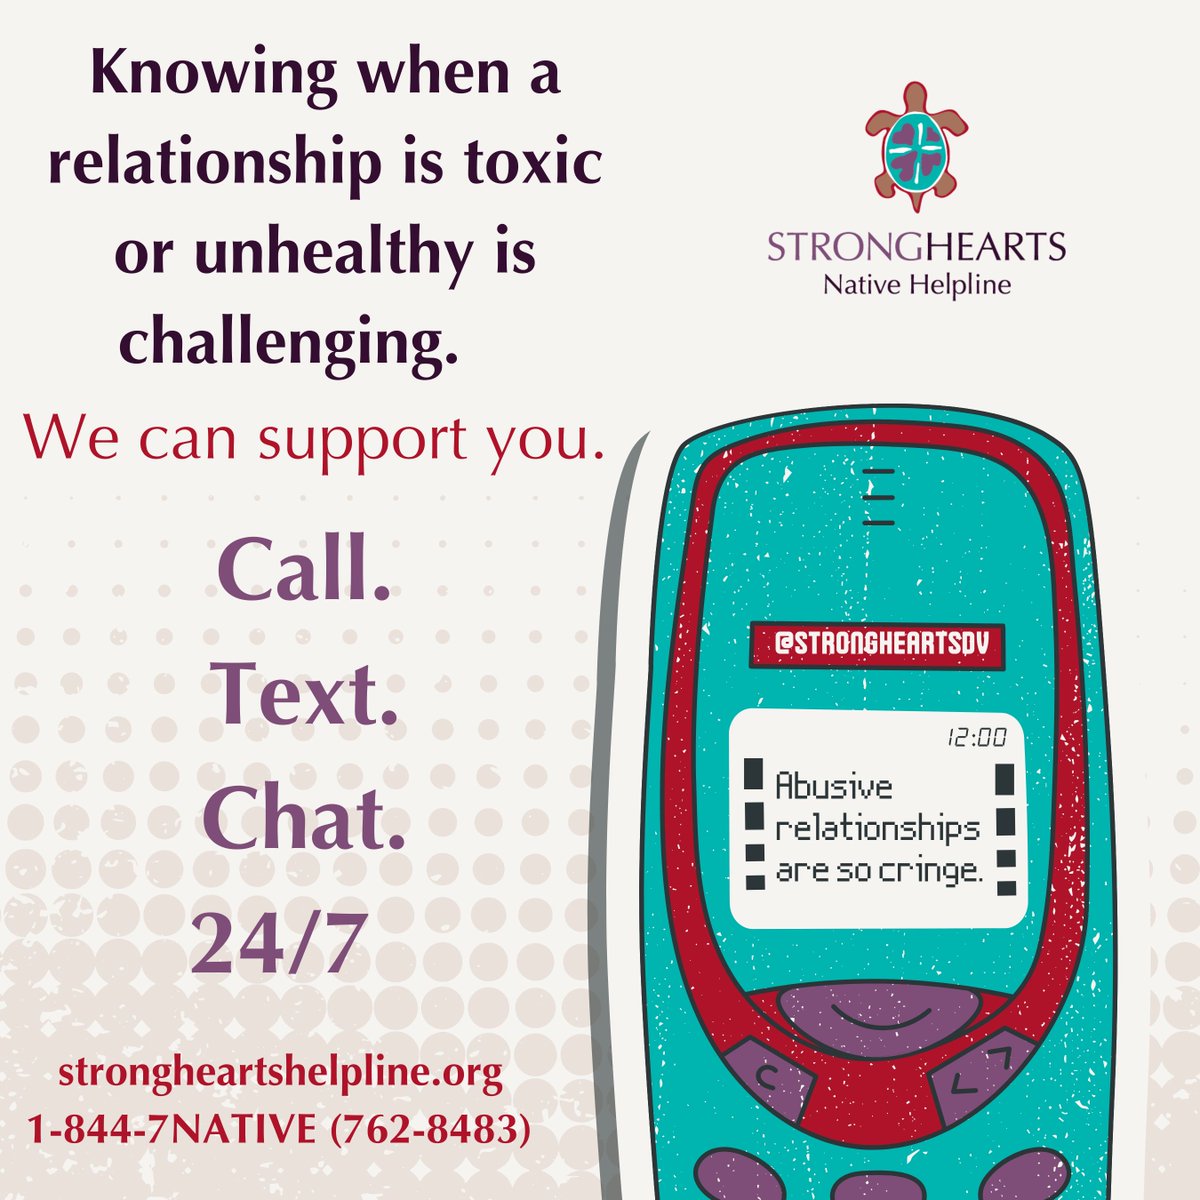 Knowing when a relationship is toxic or unhealthy is challenging. We can support you. 🫶🏼

strongheartshelpline.org
1-844-7NATIVE (762-8483)

#TeenDVAM #ParentsPreventingDV